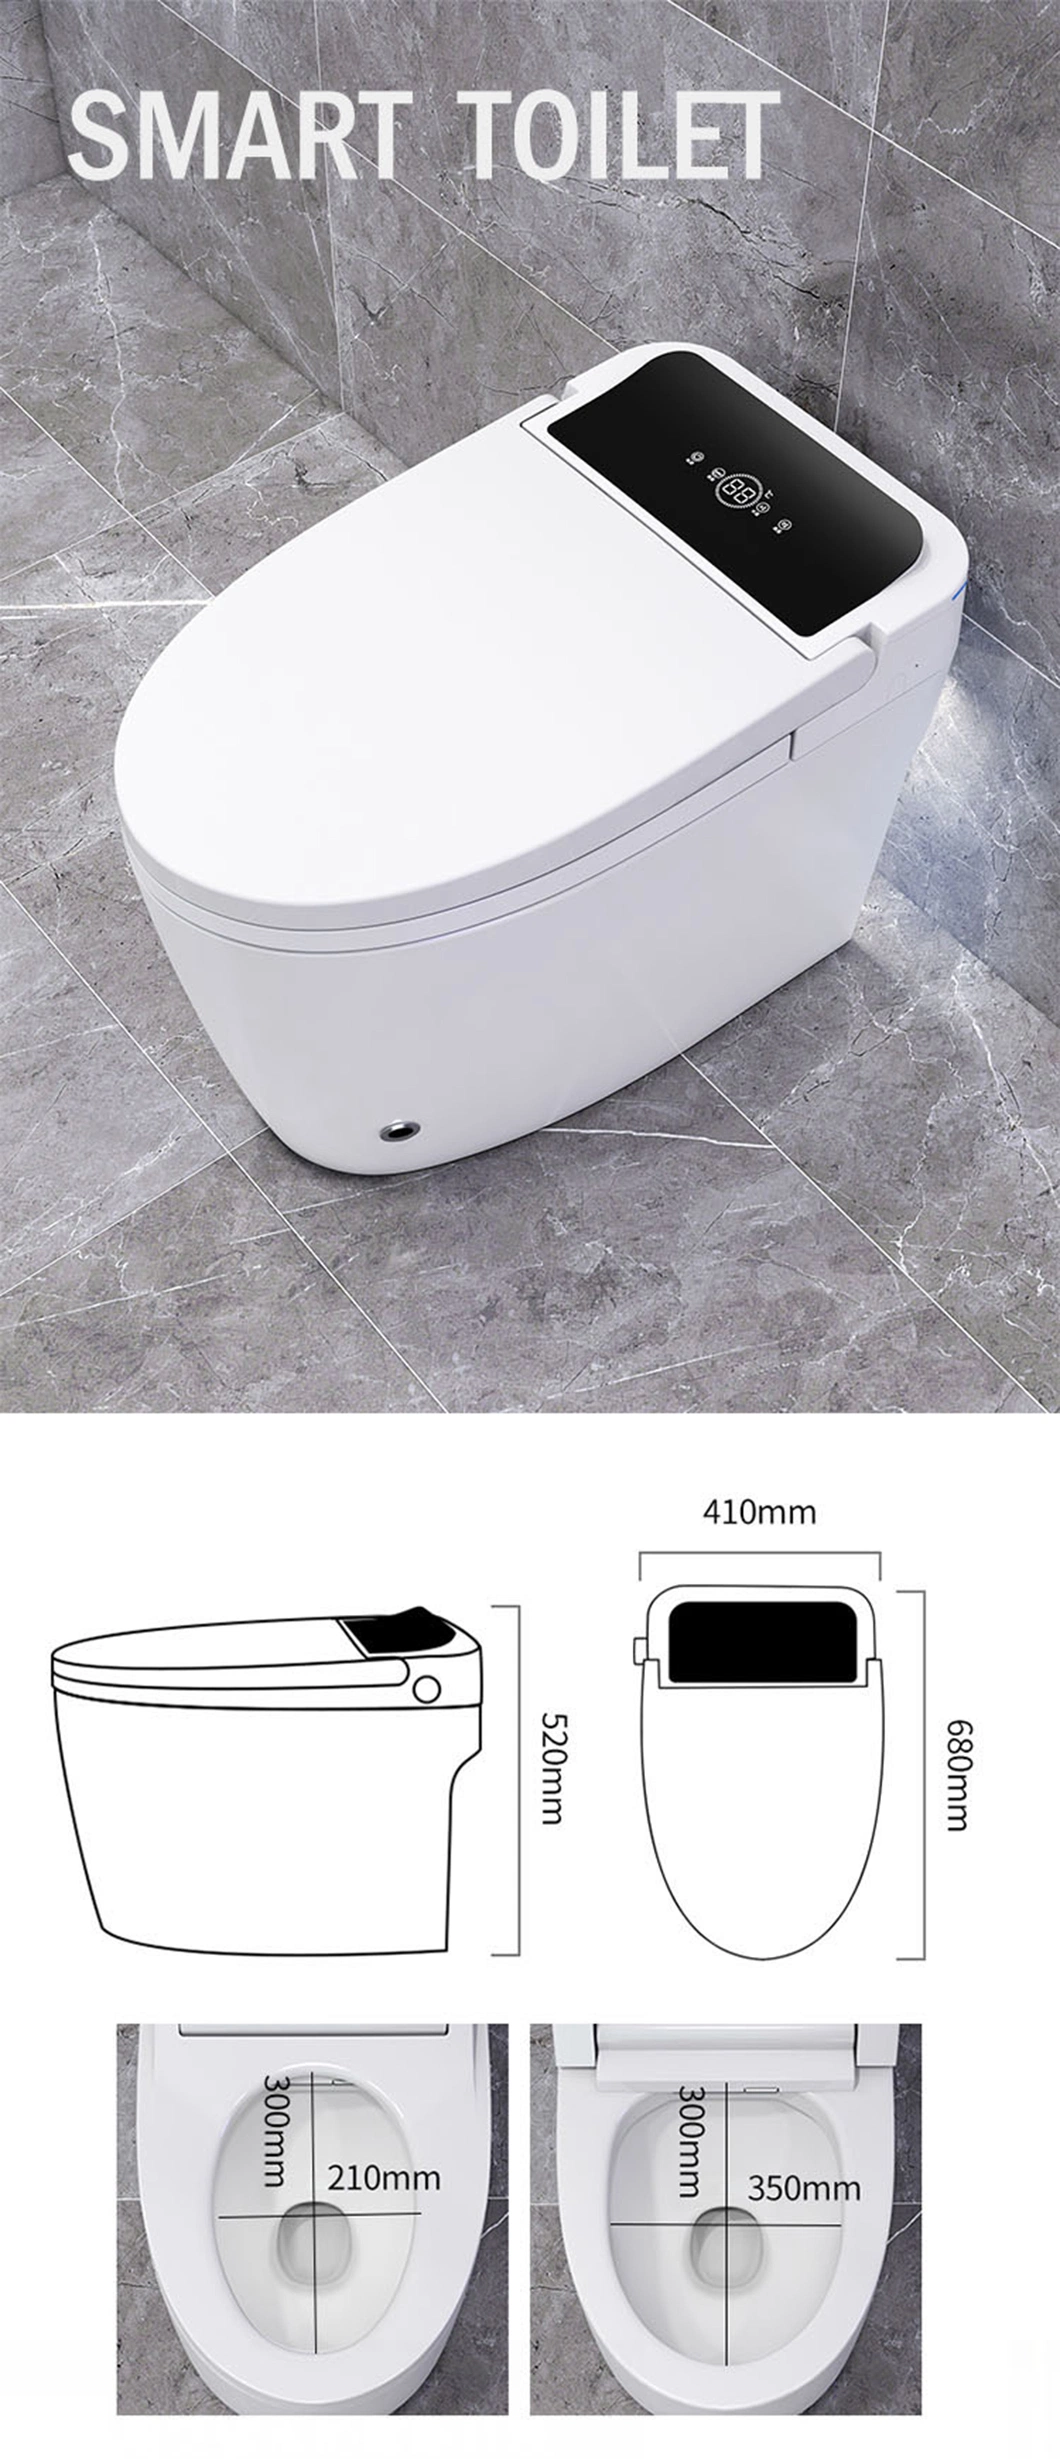 Self Cleaning Sensor Smart Toilet Automatic Flush Remote Control Heated Inodoros Intelligent Toilet with Warm Seat